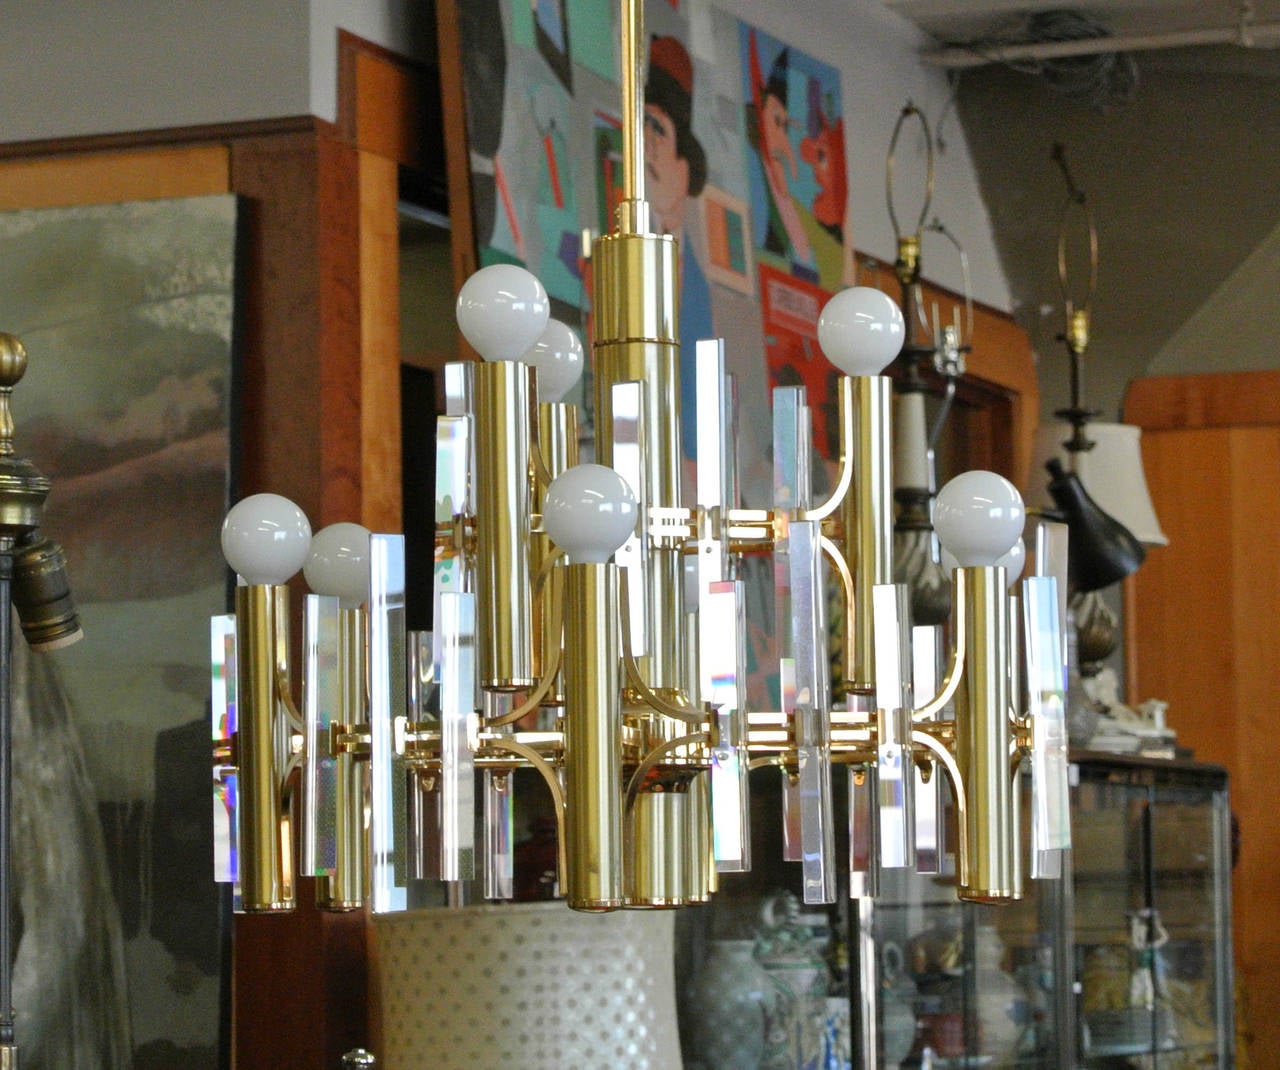 Late 1970s/Early 1980s Brushed Brass and Crystal Nine Light and Two Tiered Chandelier Attributed to Gaetano Scolari. Shown with style appropriate round lightbulbs. The chandelier also has gilt framework details. There are nine 8